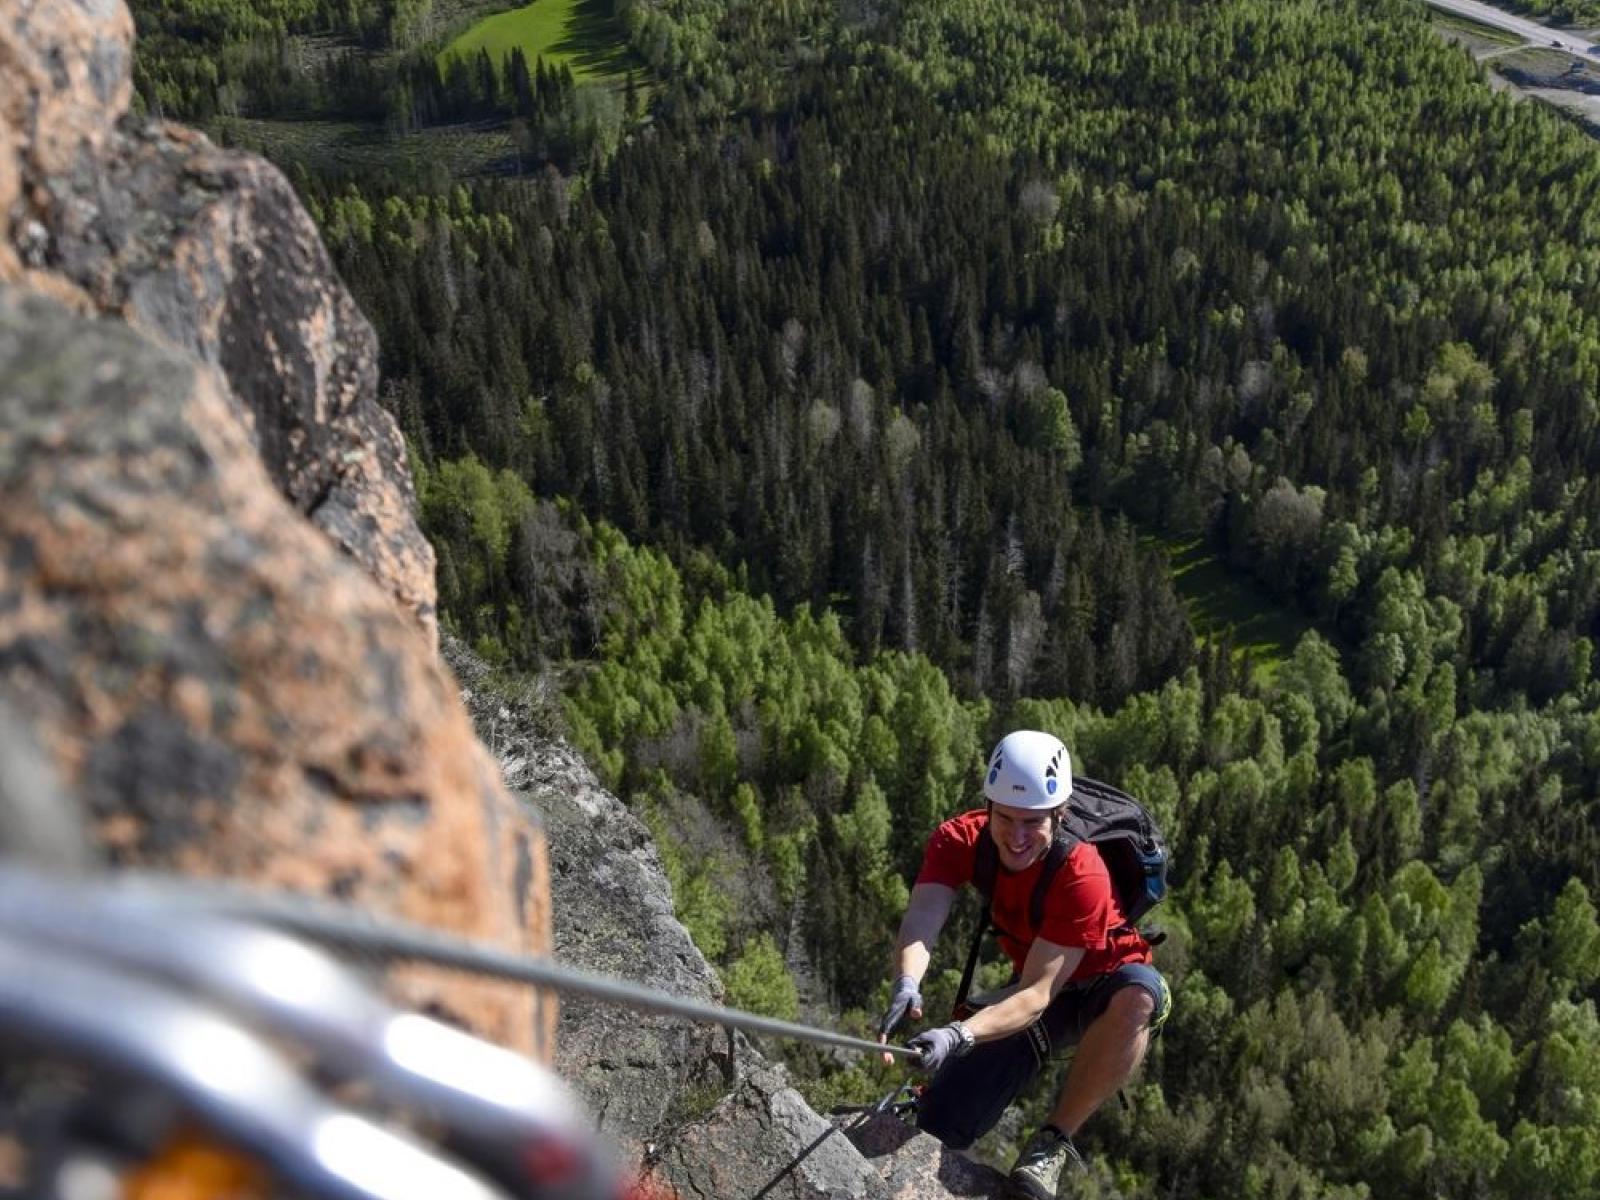 Via Ferrata - Climbing for everyone - Four routes of varying difficulty